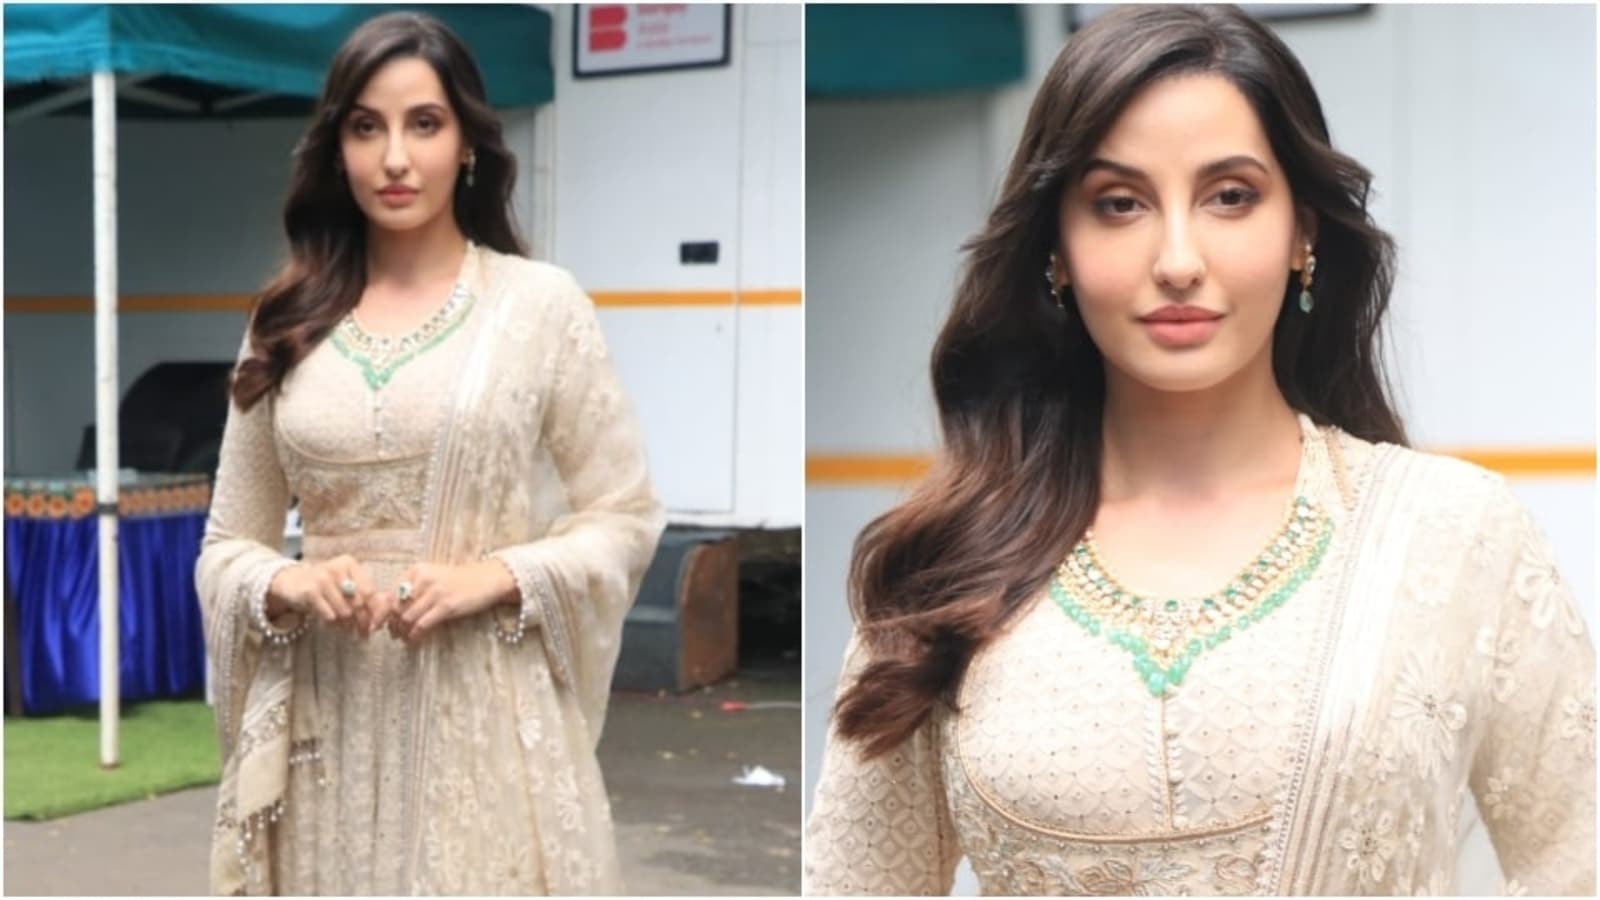 Pics: Nora Fatehi promotes Bhuj in ethereal white anarkali on ...